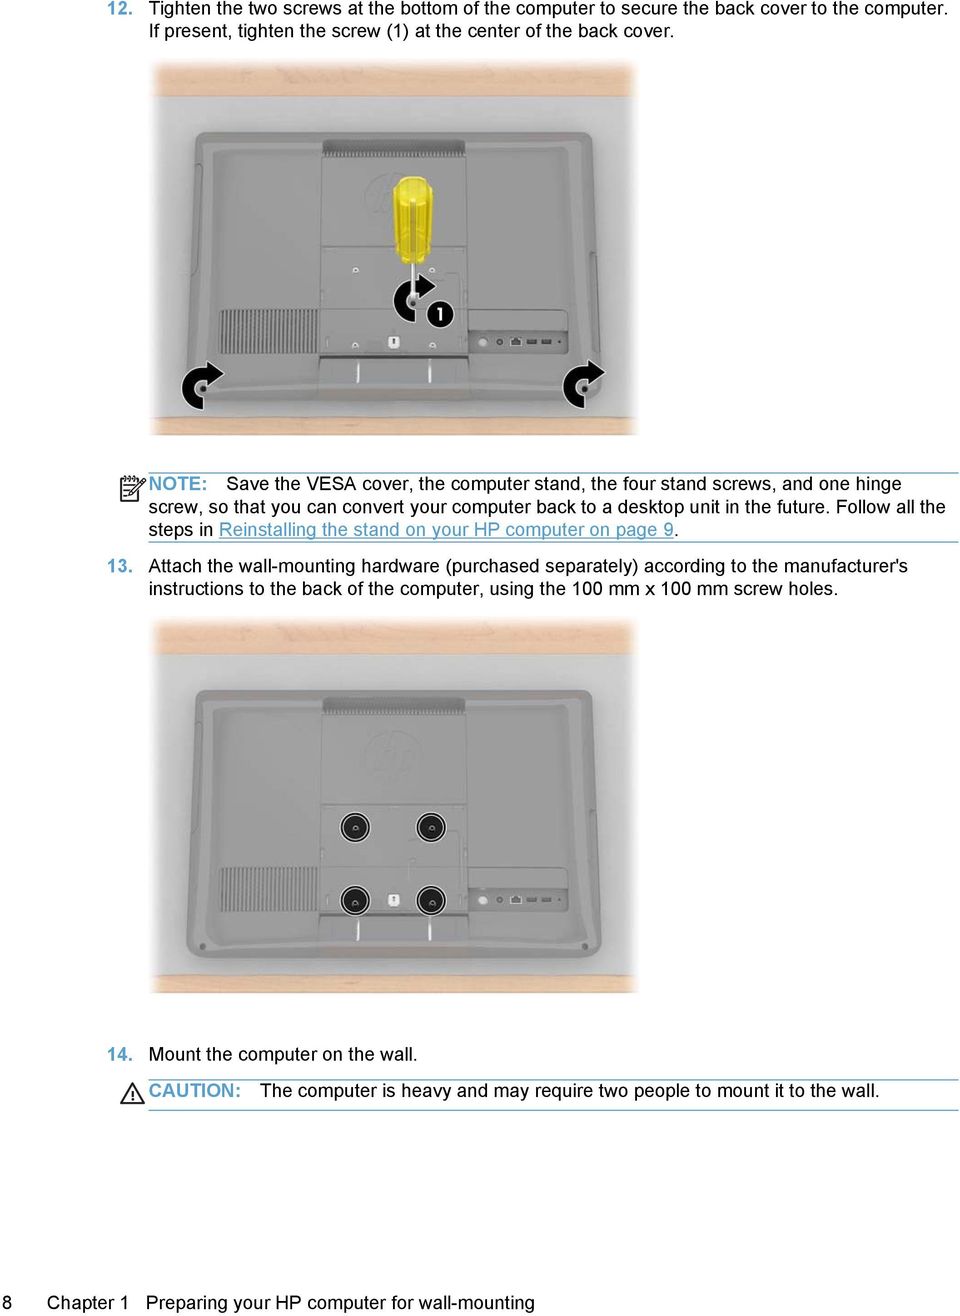 Follow all the steps in Reinstalling the stand on your HP computer on page 9. 13.